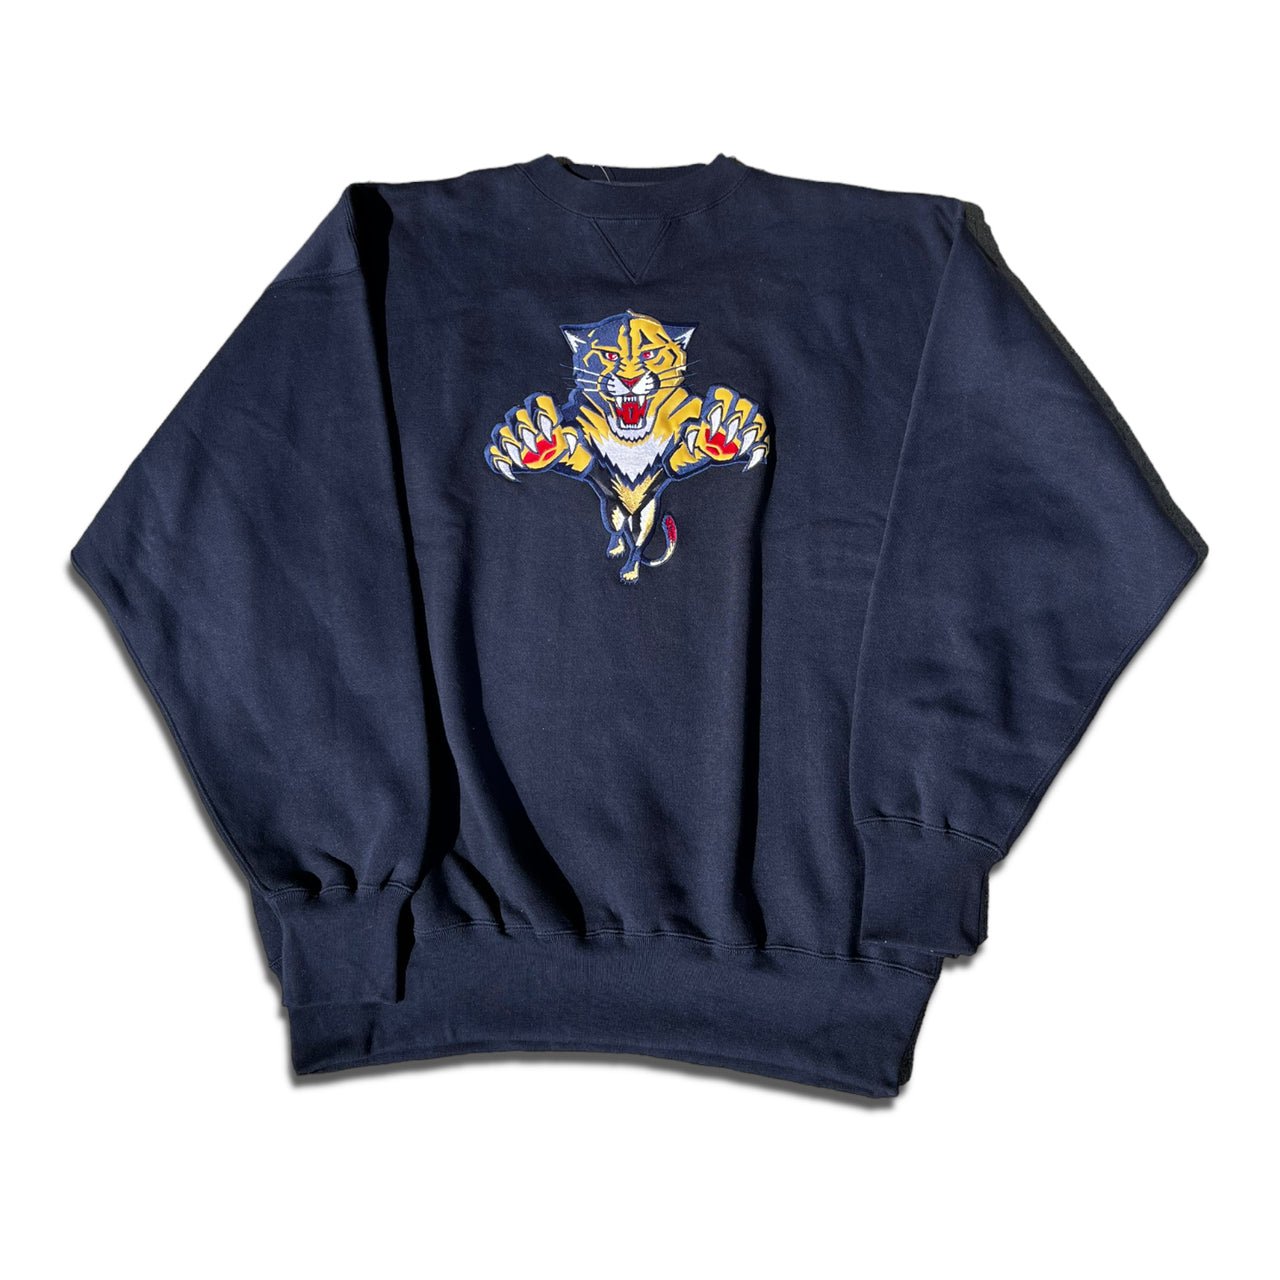 Florida Panthers Vintage Embroidered Crewneck XL NEW